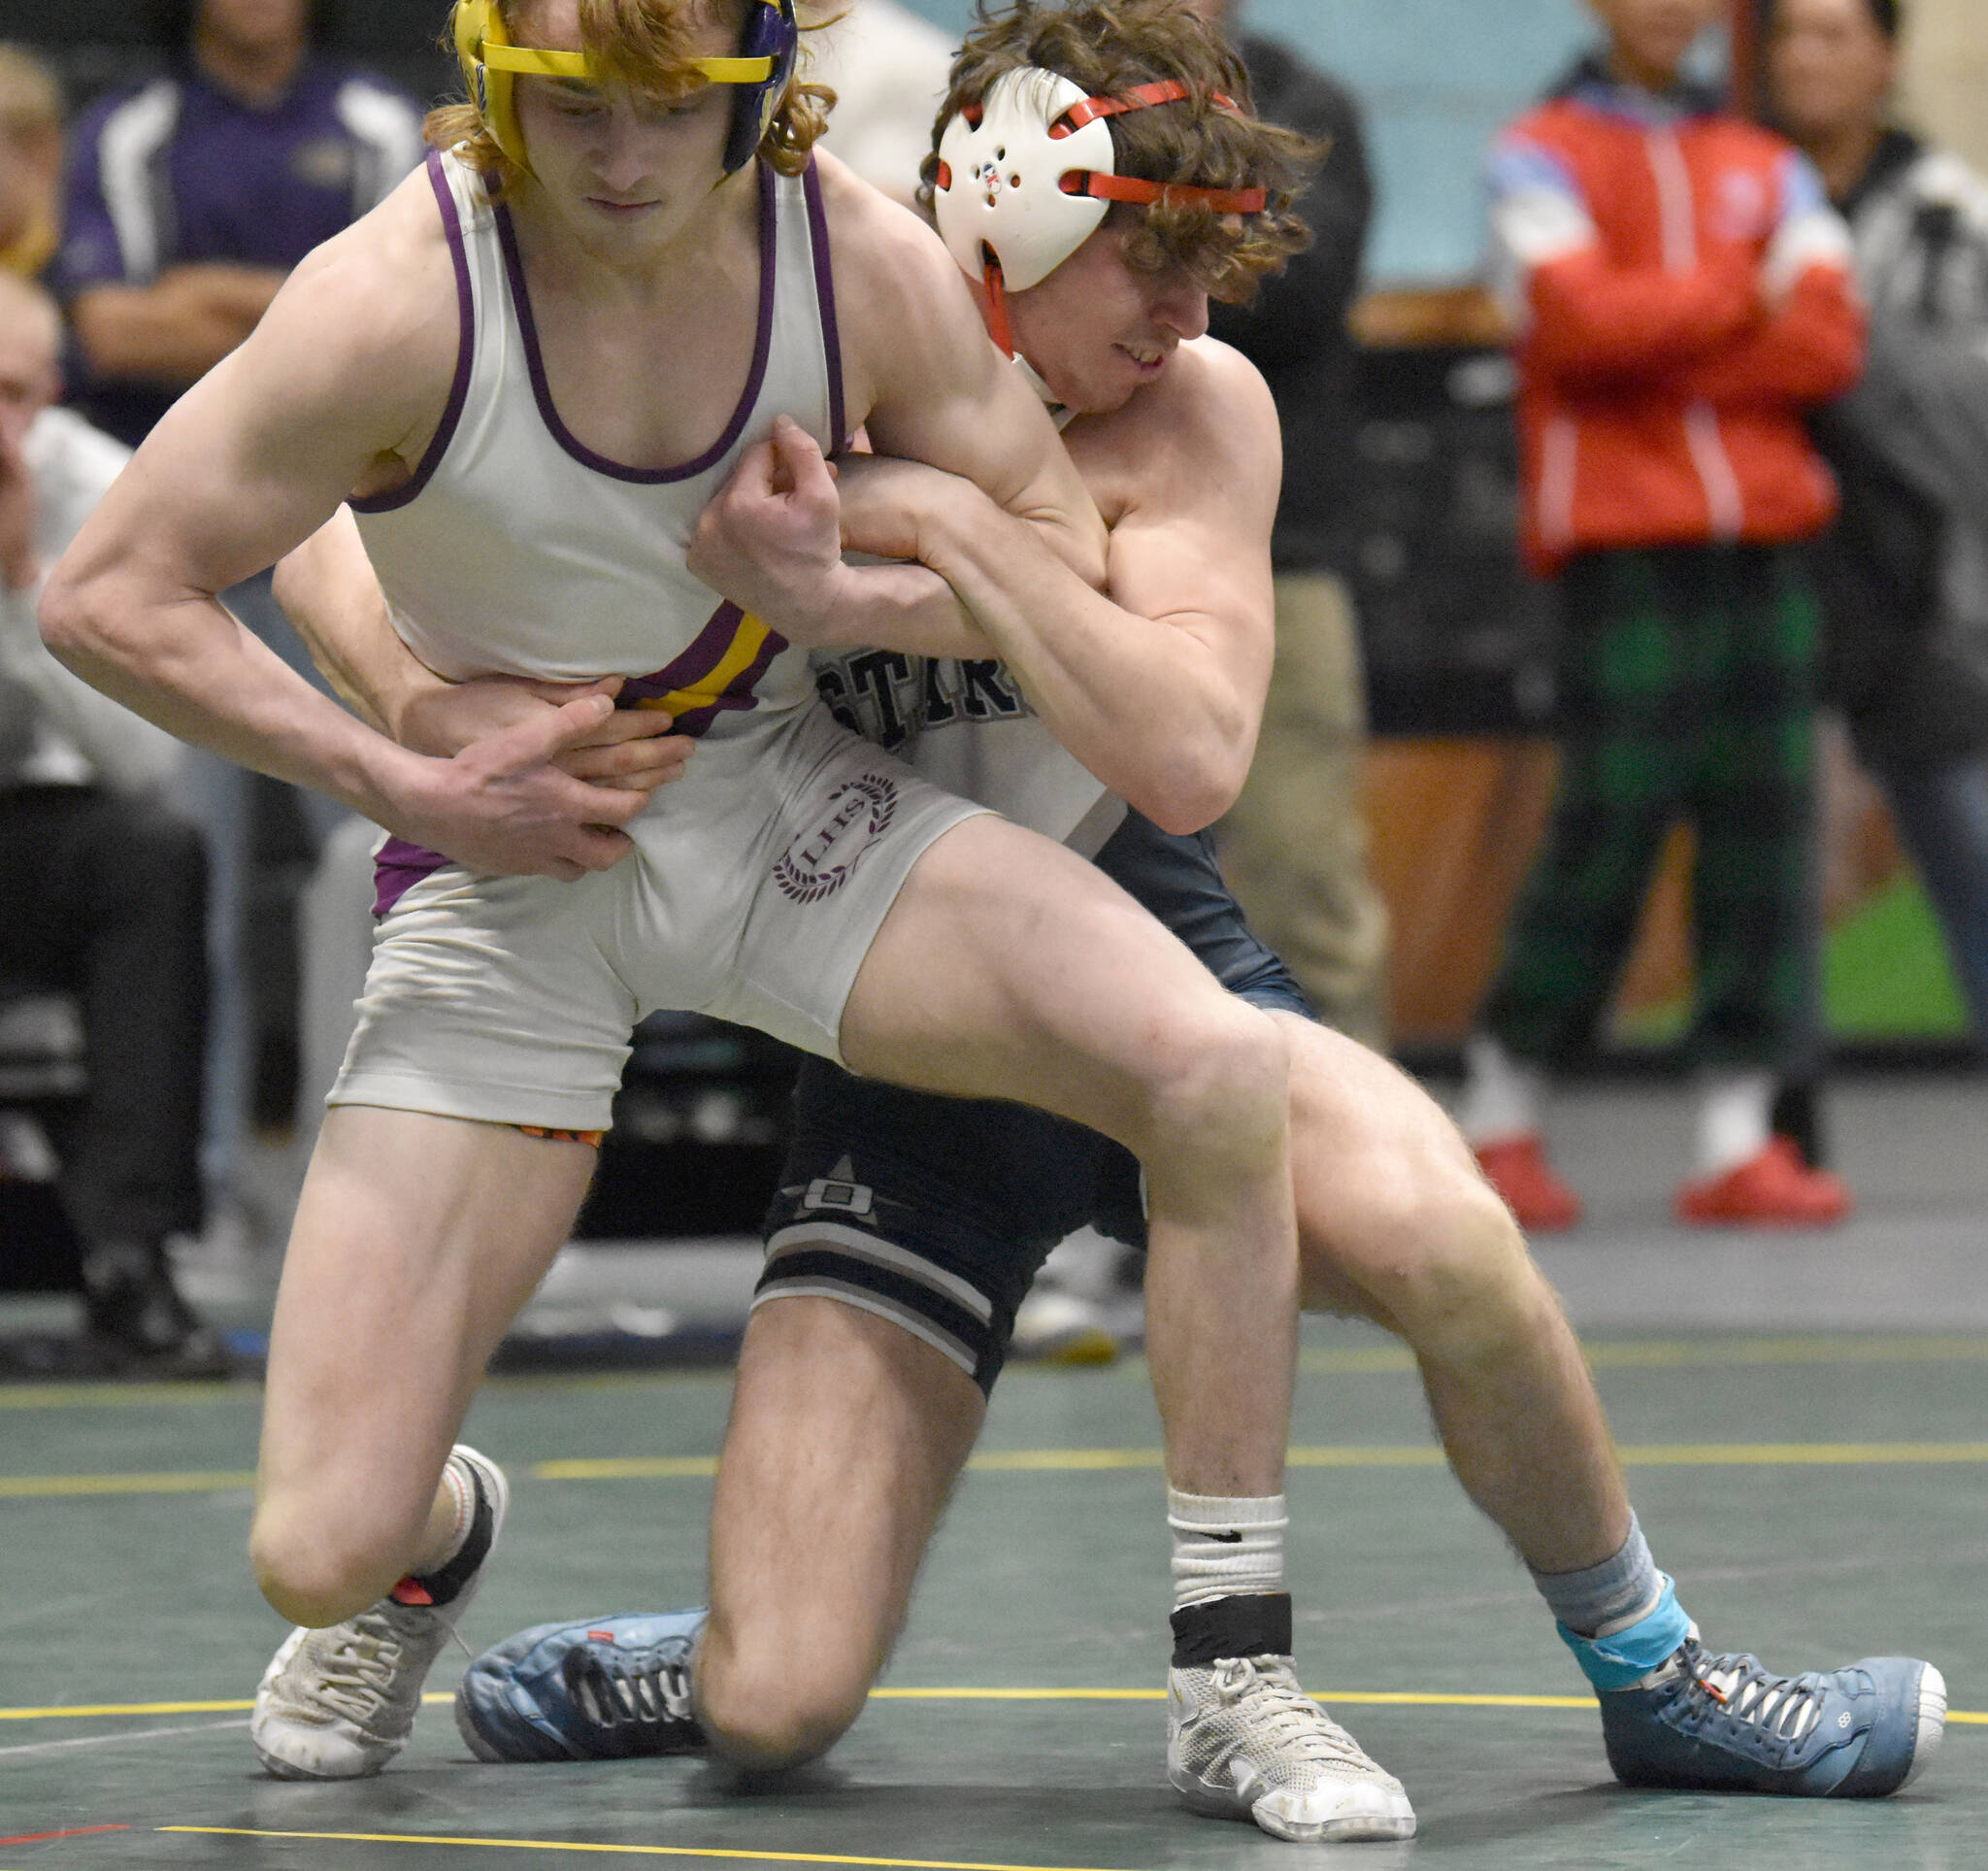 Soldotna’s Ezekiel Miller defeats Lathrop’s Riley Williams for the Division I state title at 125 pounds Saturday, Dec. 18, 2022, at the state wrestling tournament at the Alaska Airlines Center in Anchorage, Alaska. (Photo by Jeff Helminiak/Peninsula Clarion)